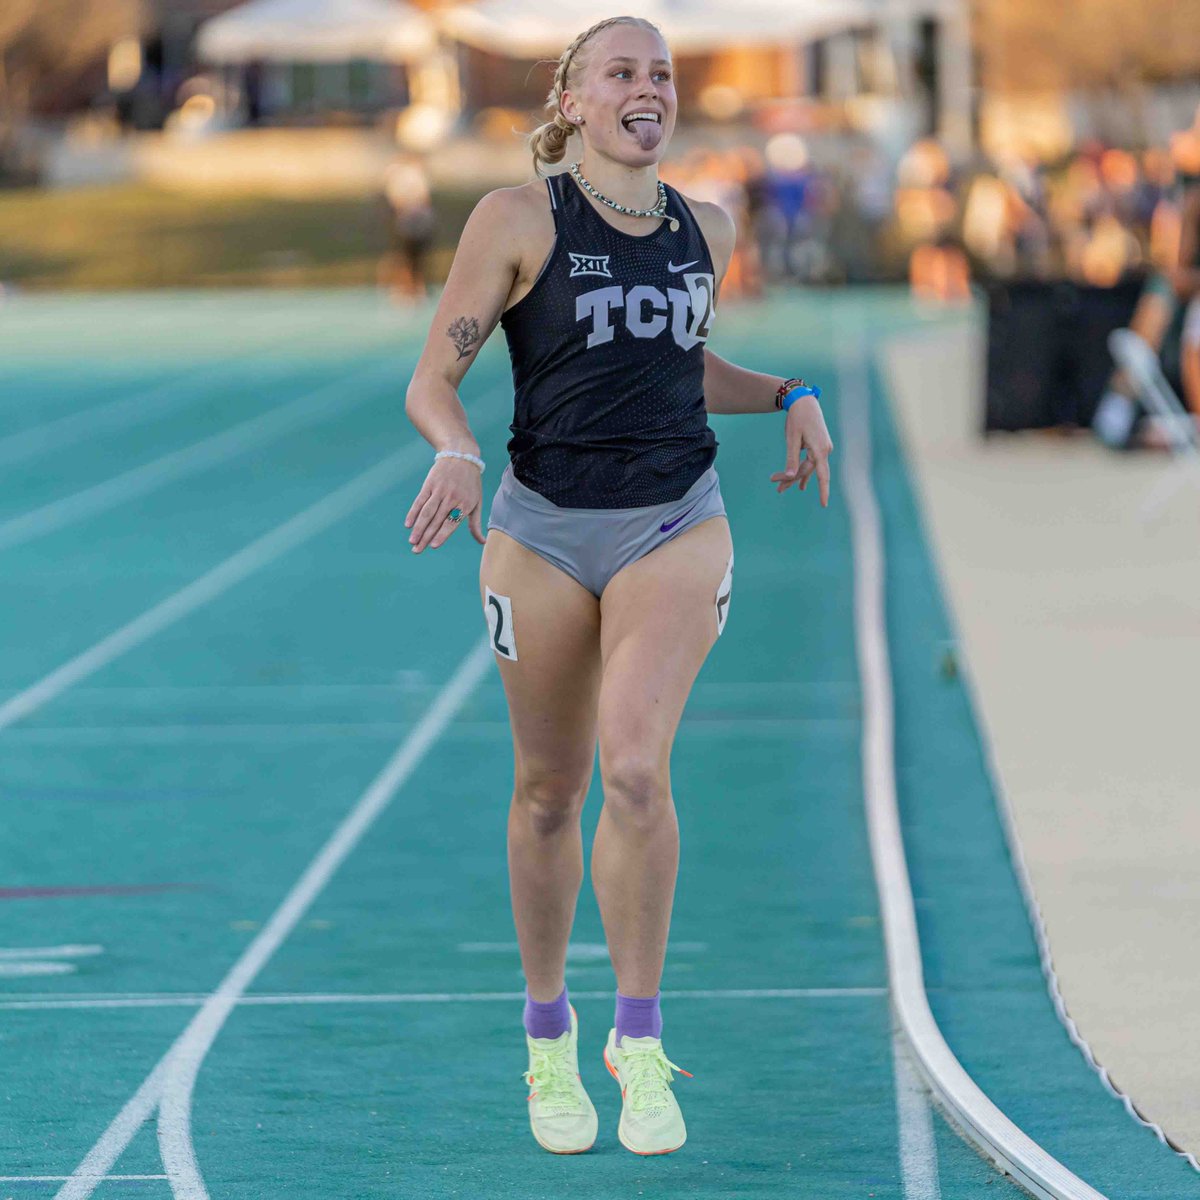 Gracie Morris runs the 𝙛𝙖𝙨𝙩𝙚𝙨𝙩 time in the country this season in the 1500m!! She places first with her season-best time of 4:17.93 😈 #GoFrogs | @ggraciemorris